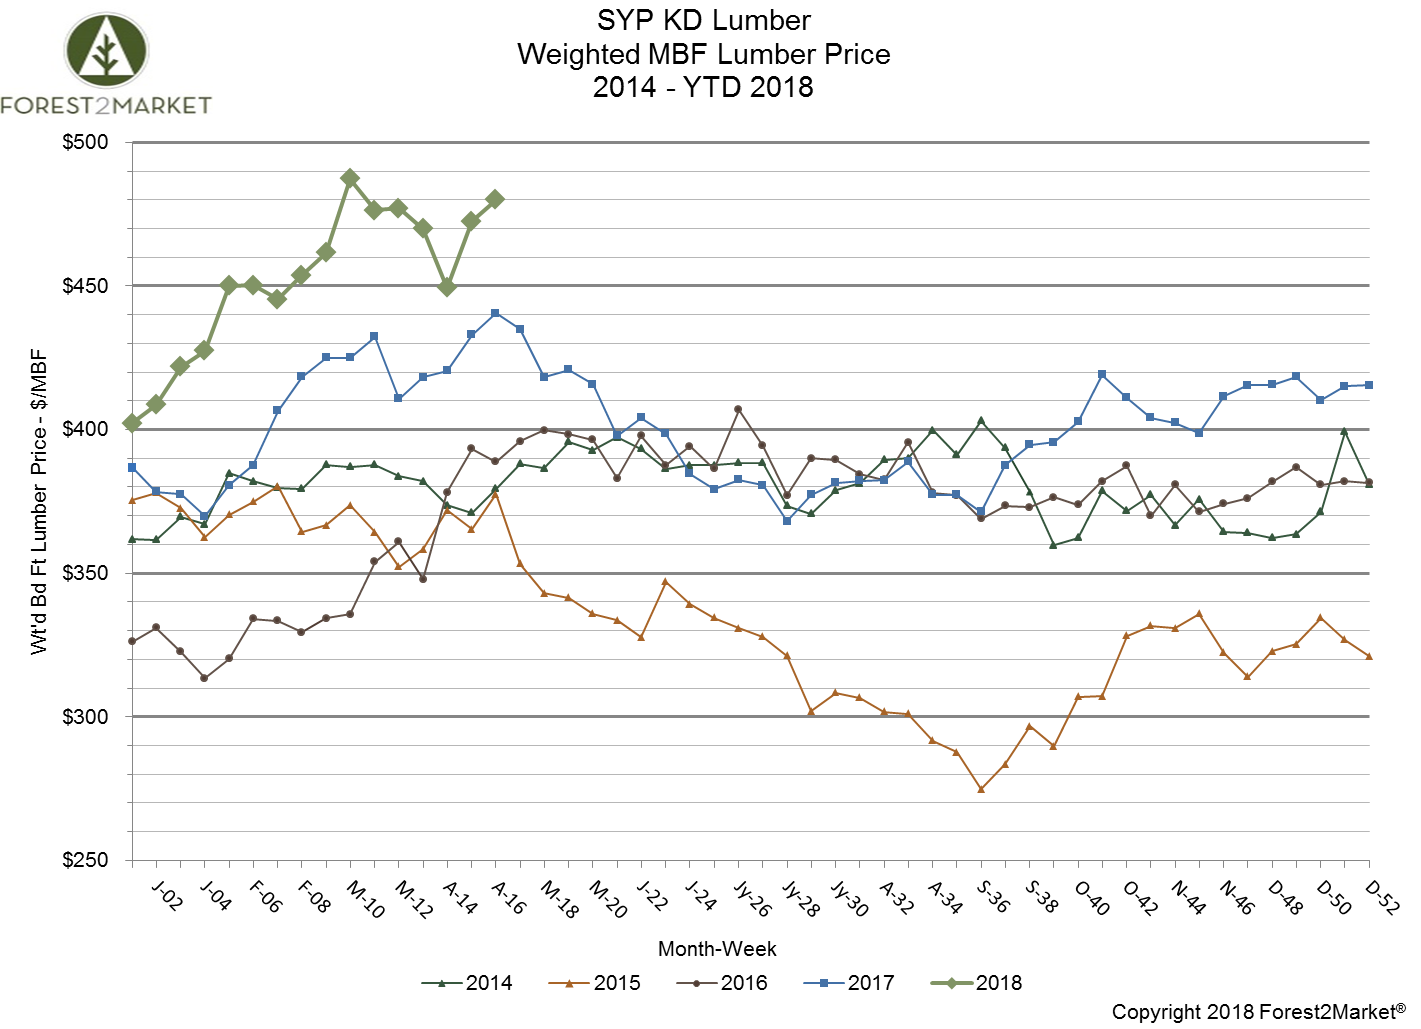 Southern Yellow Pine Lumber Prices More Volatile in April